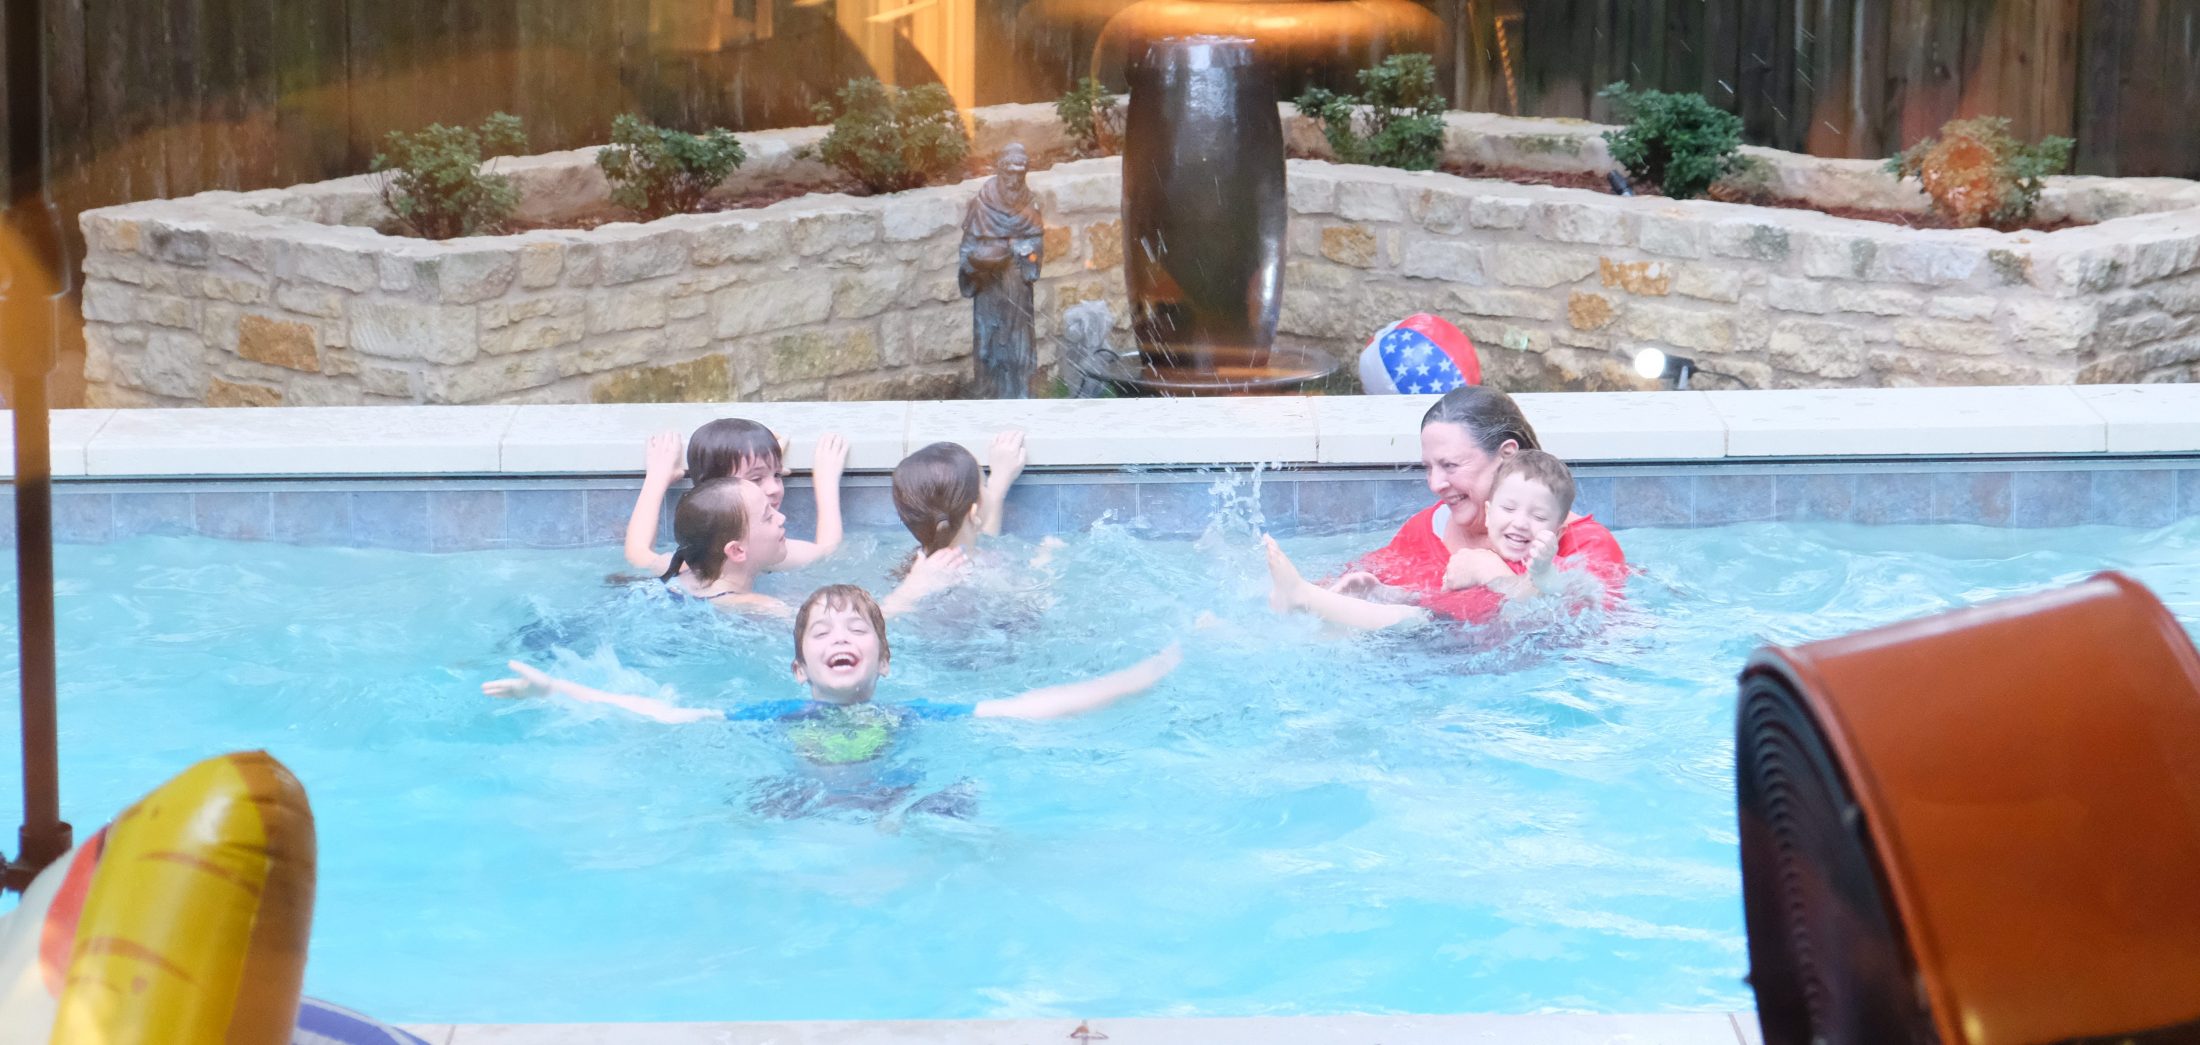 Nana and grandkids in the pool in Texas during family reunion